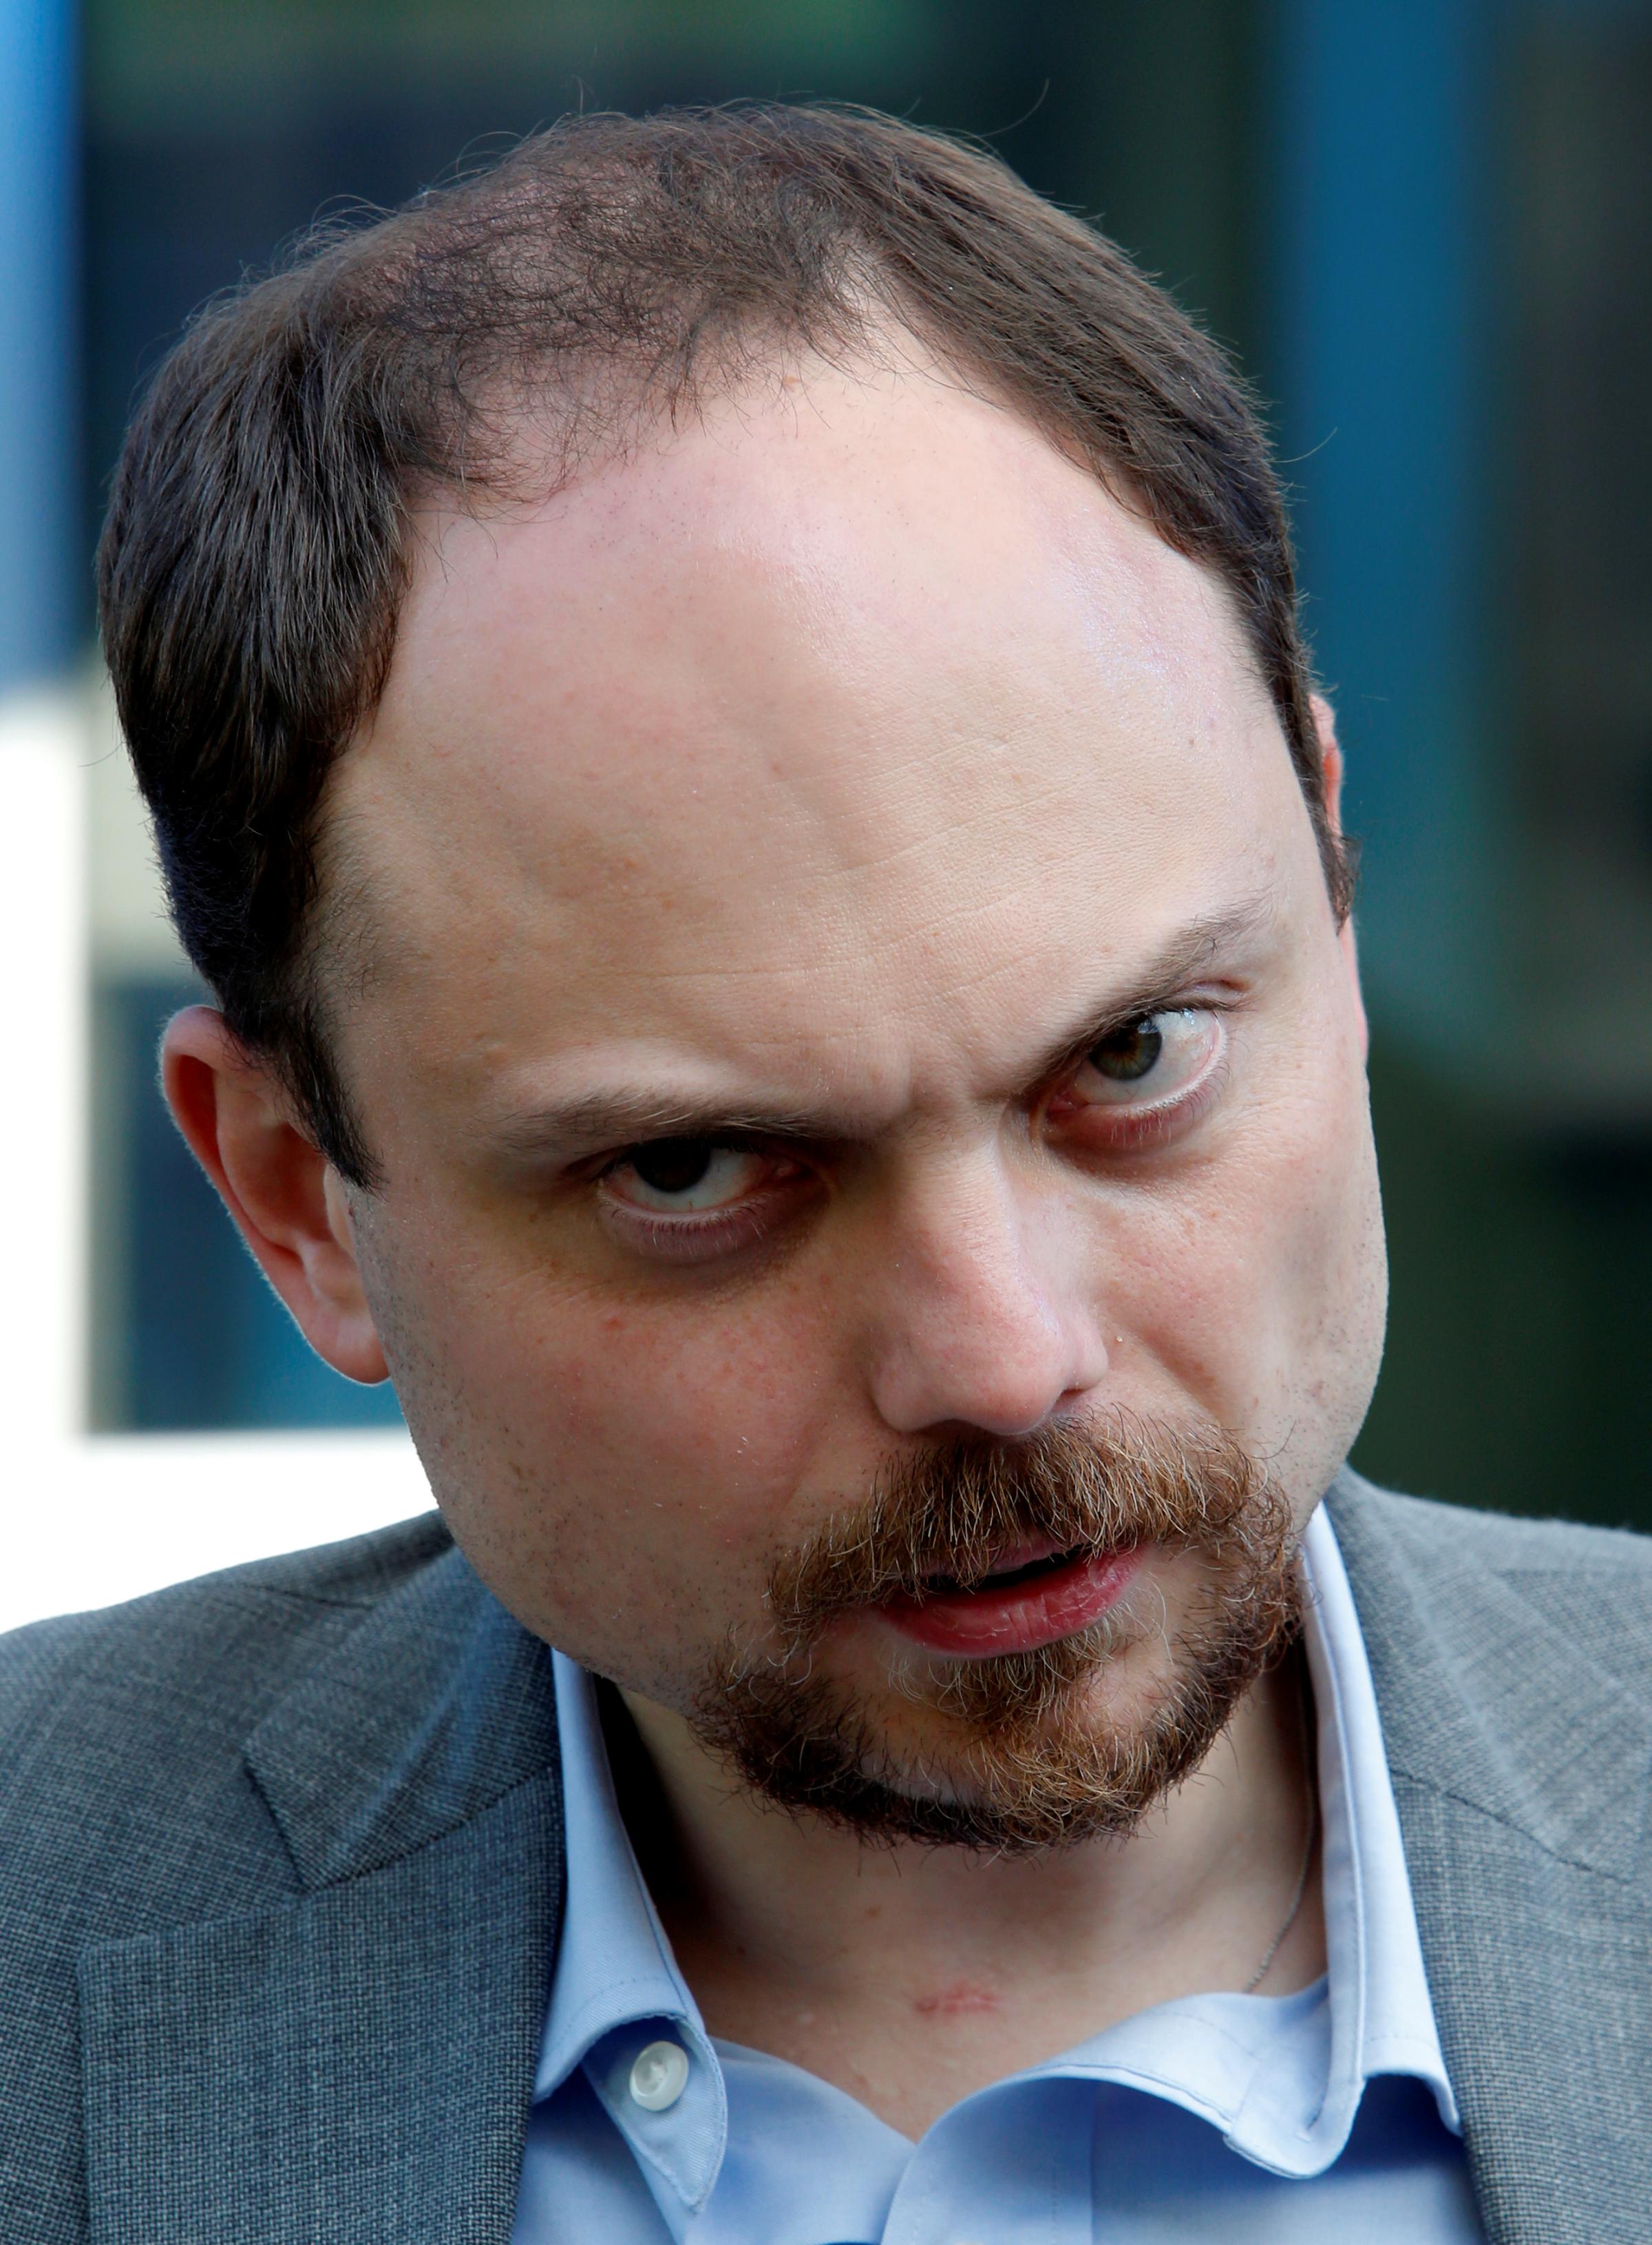 Russian opposition activist Kara-Murza looks on following a visit of deputy candidates to State Duma in Moscow